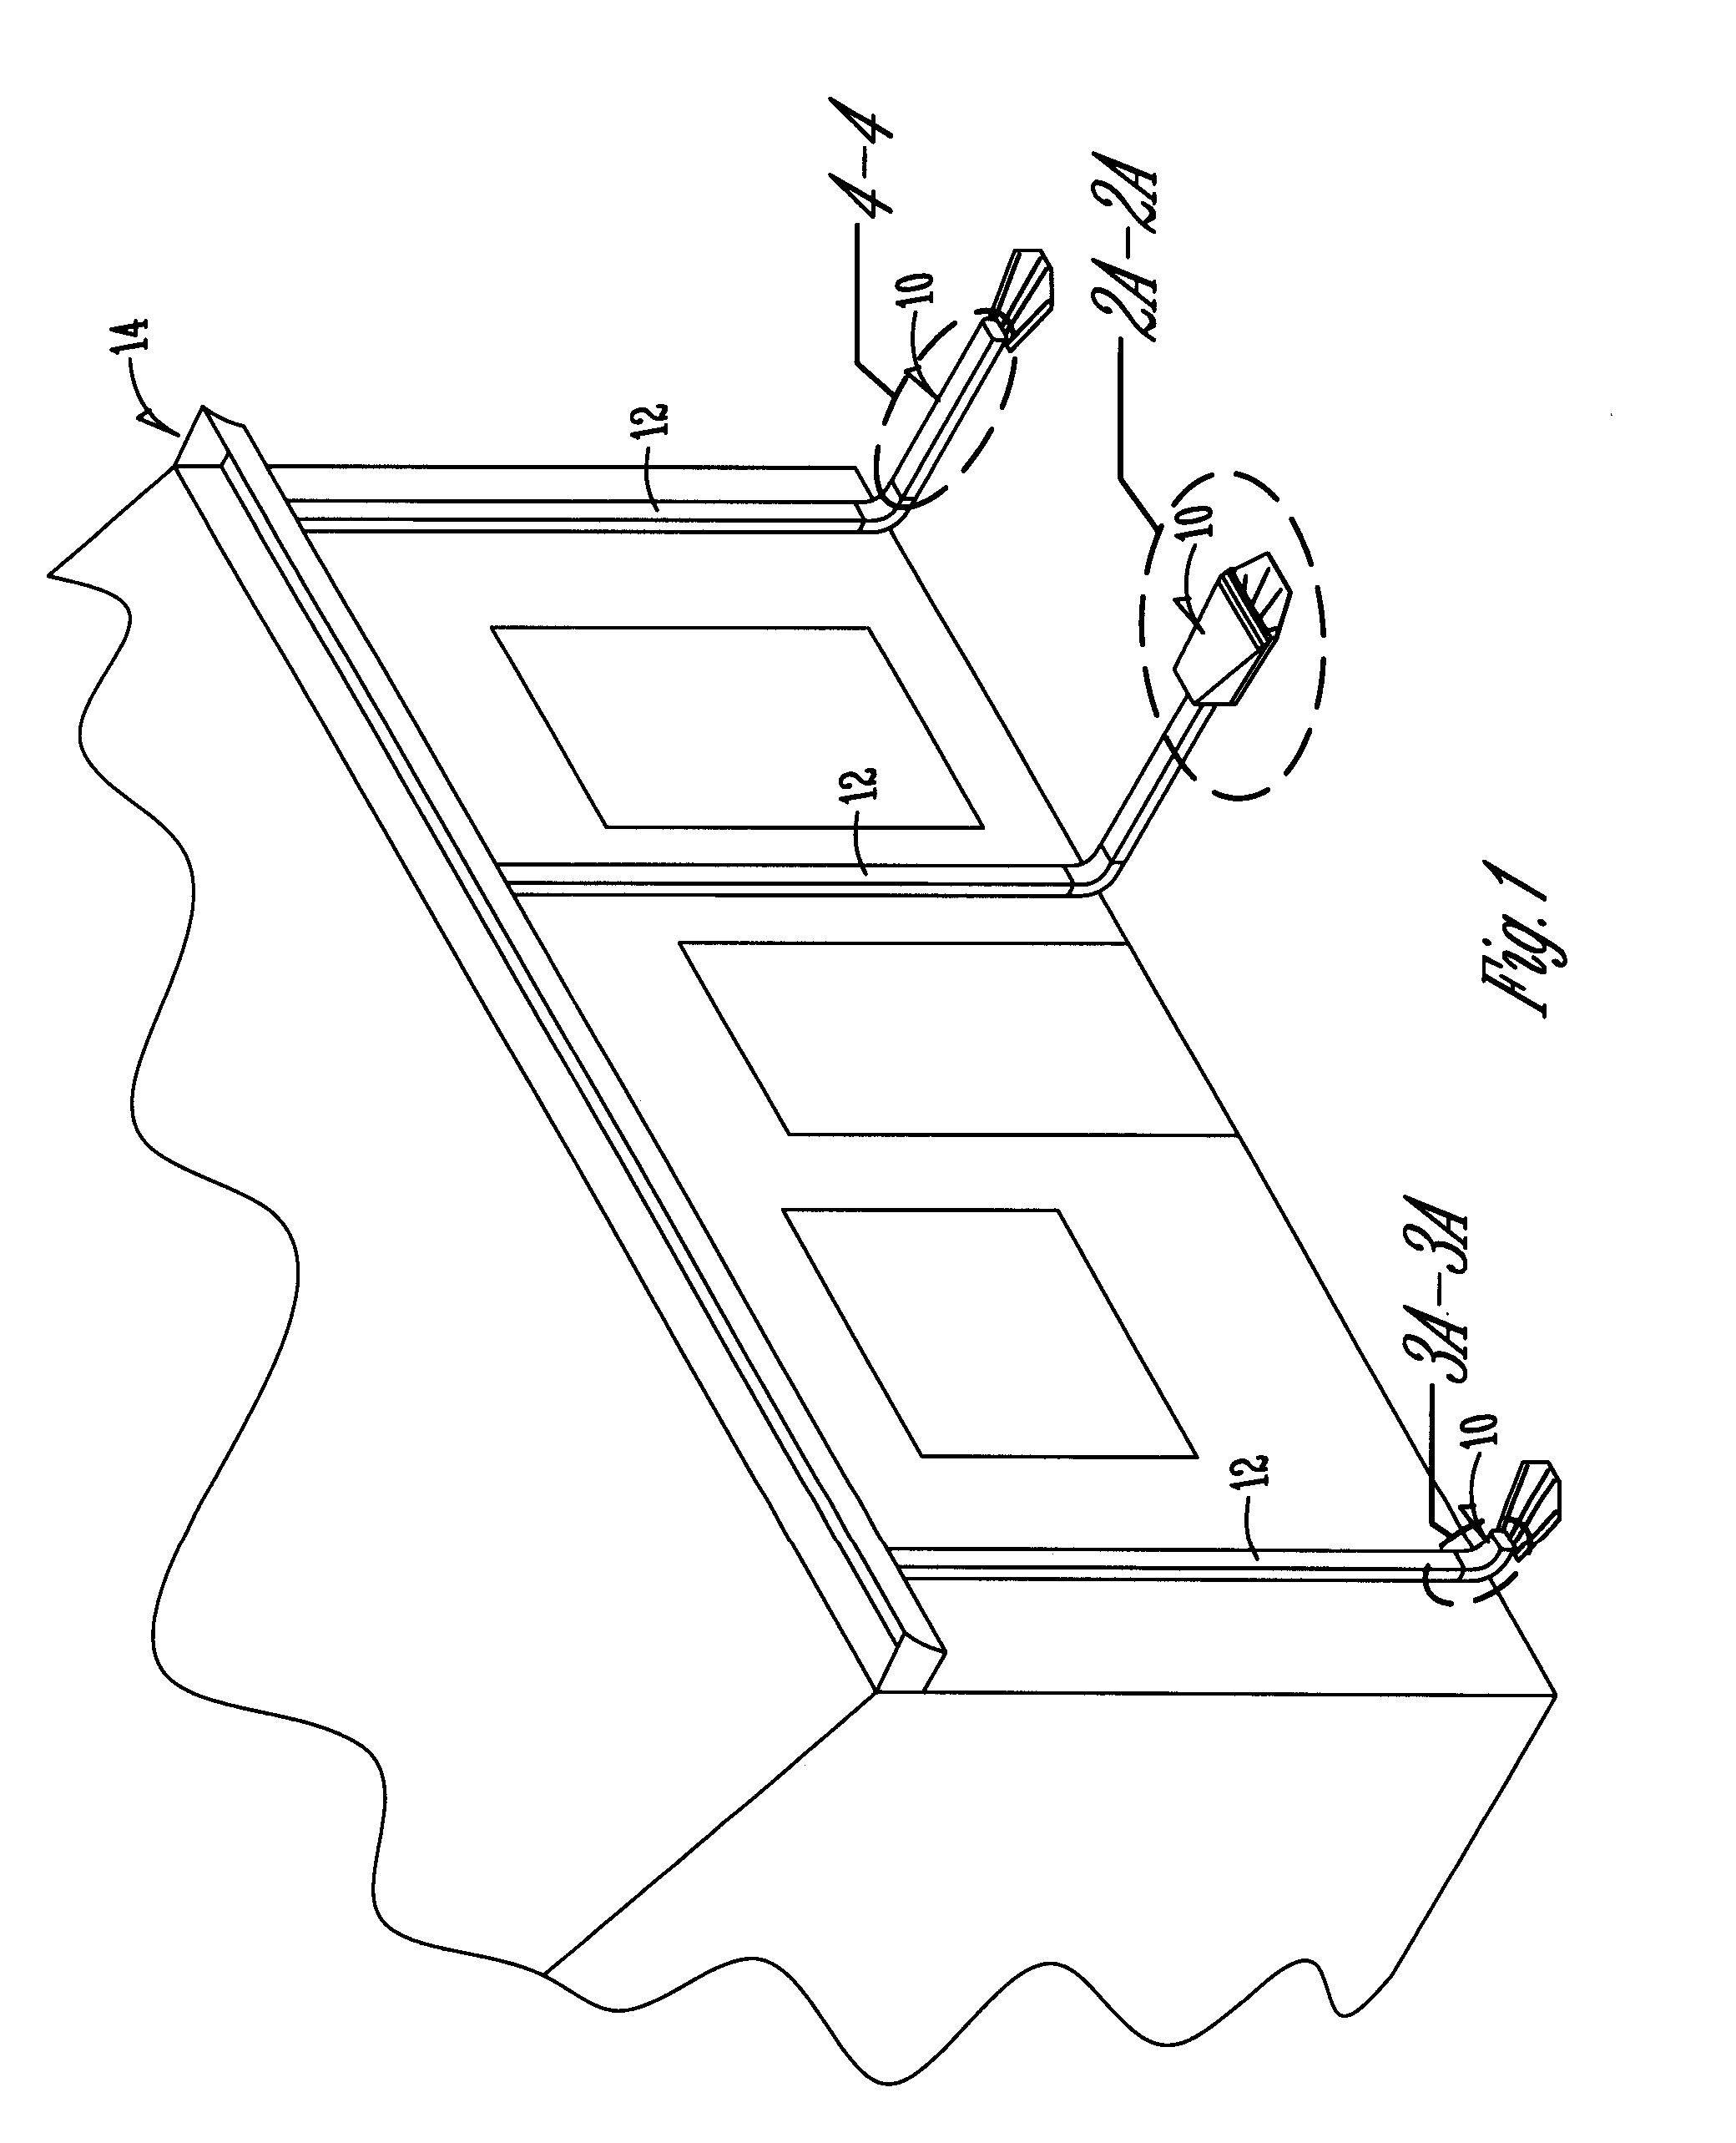 Apparatus and method for managing runoff water from a down spout of a gutter system